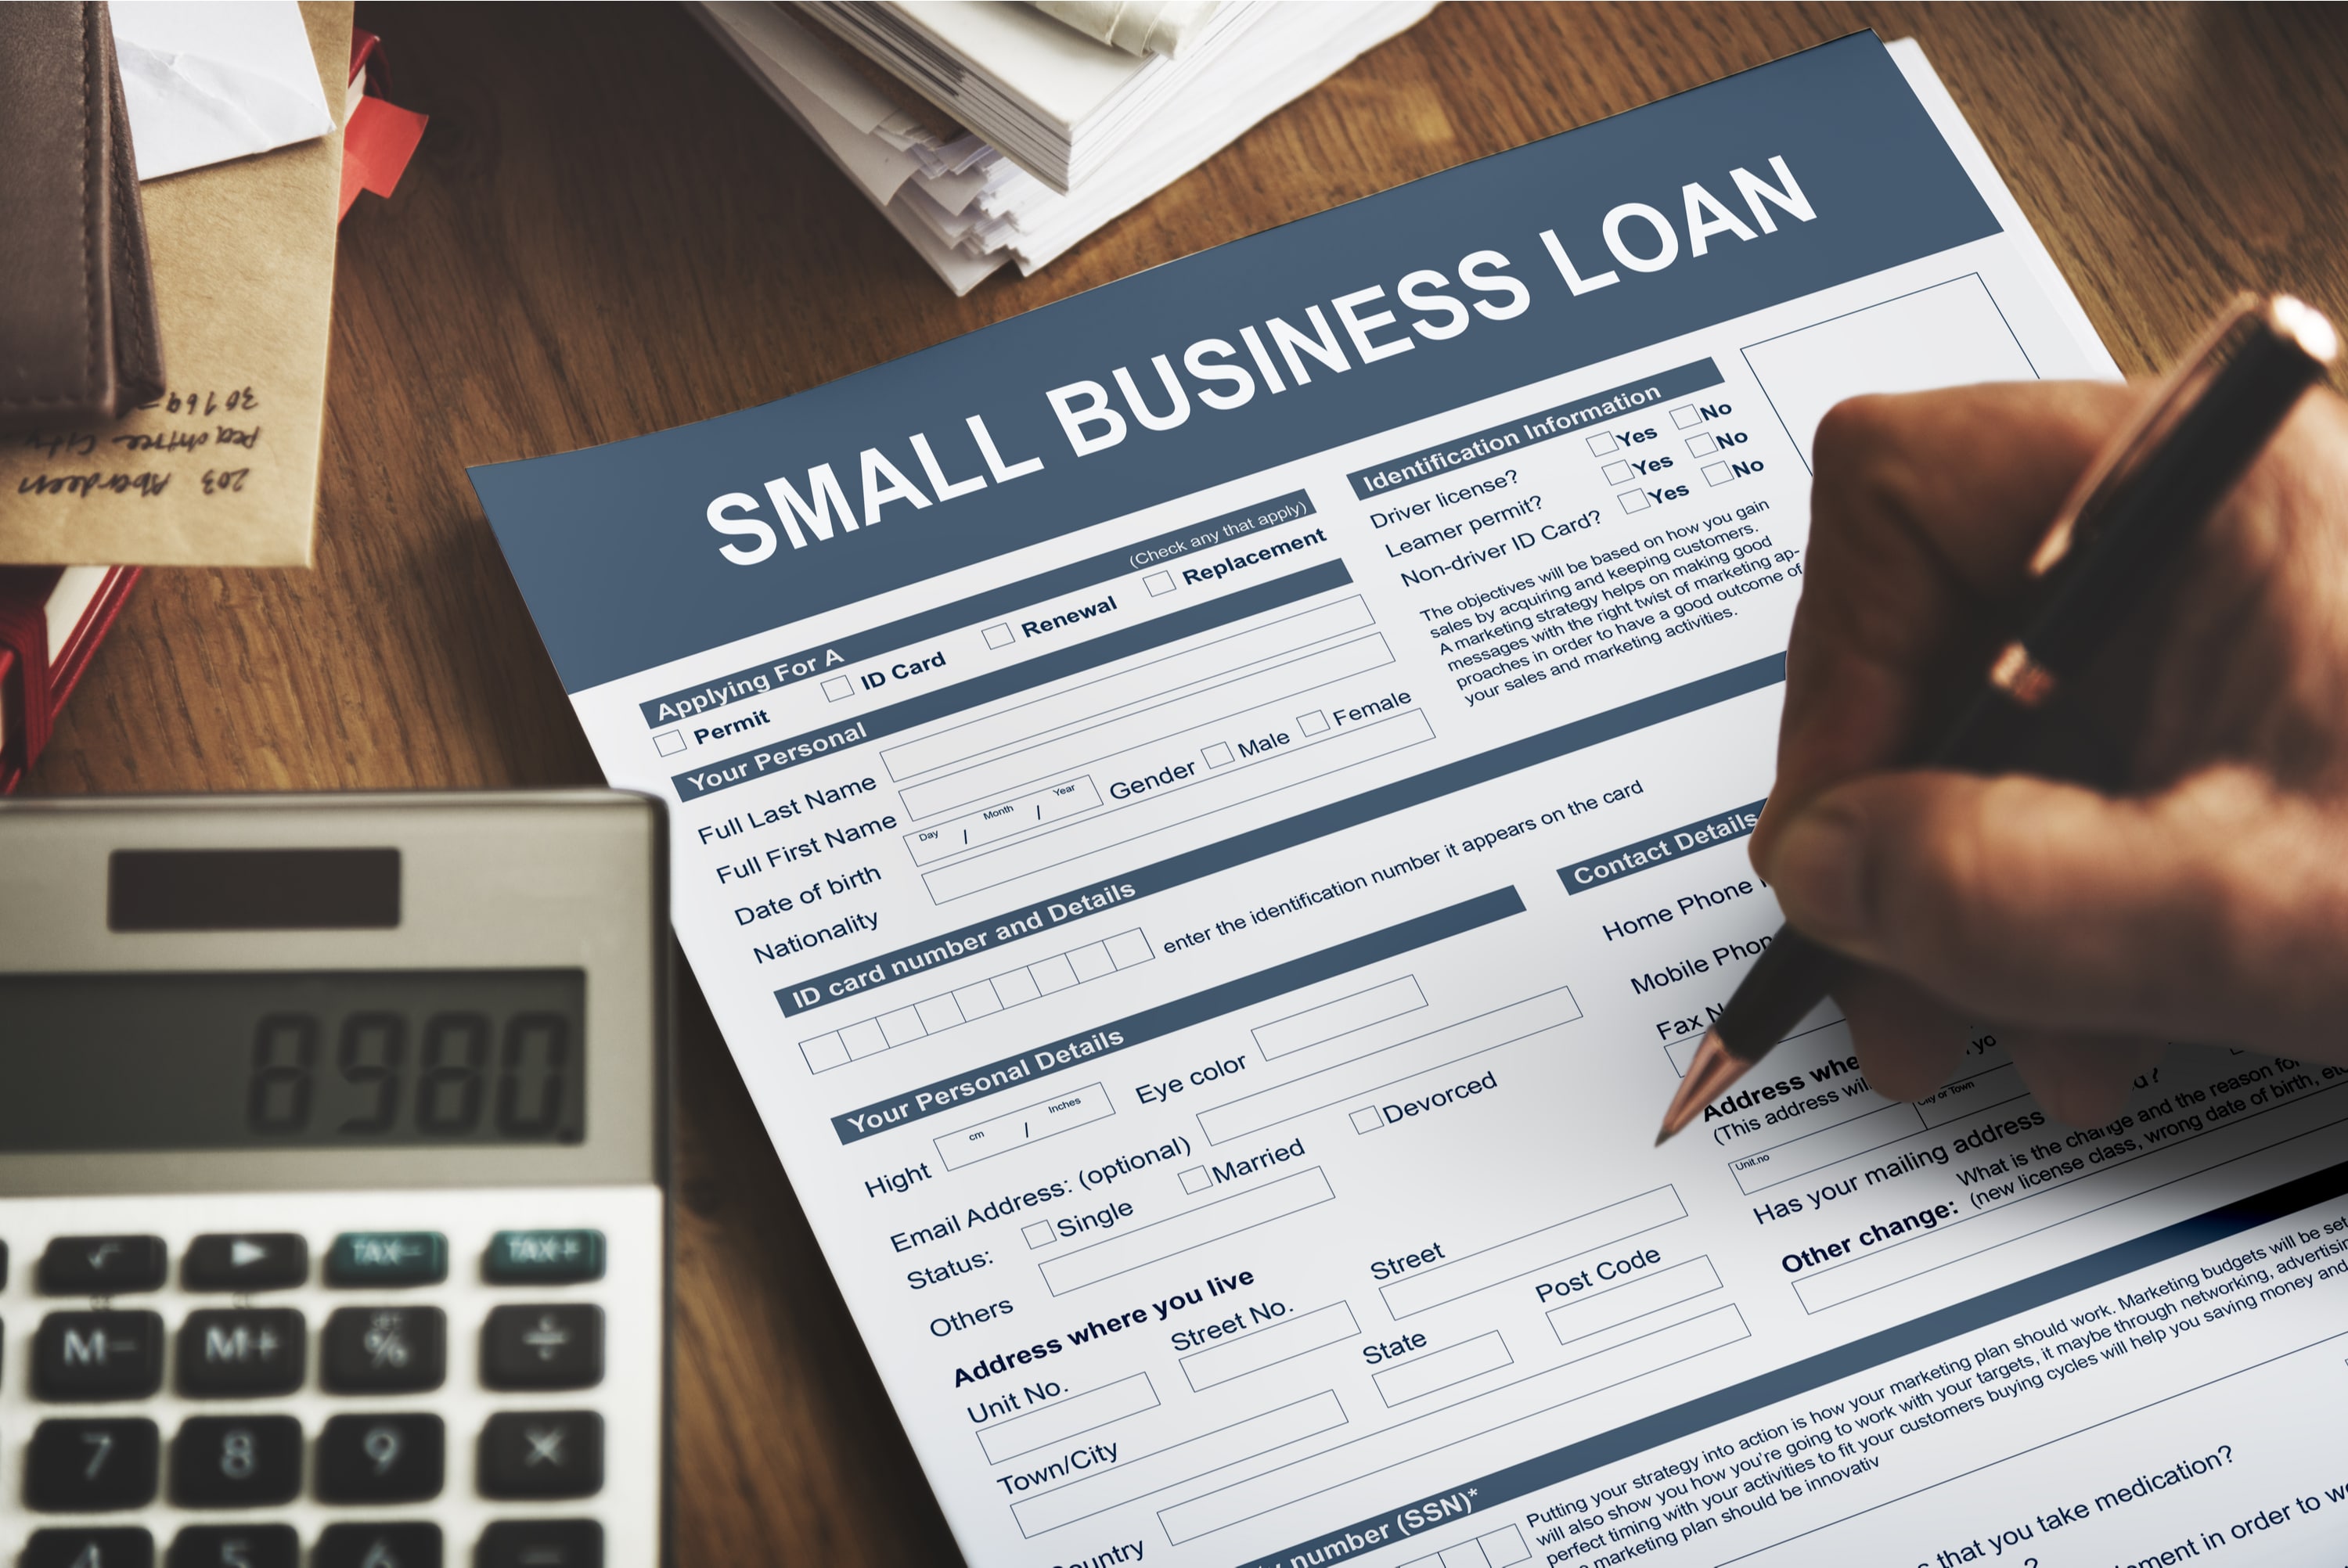 7 Types of Small Business Loans - Pros &amp; Cons